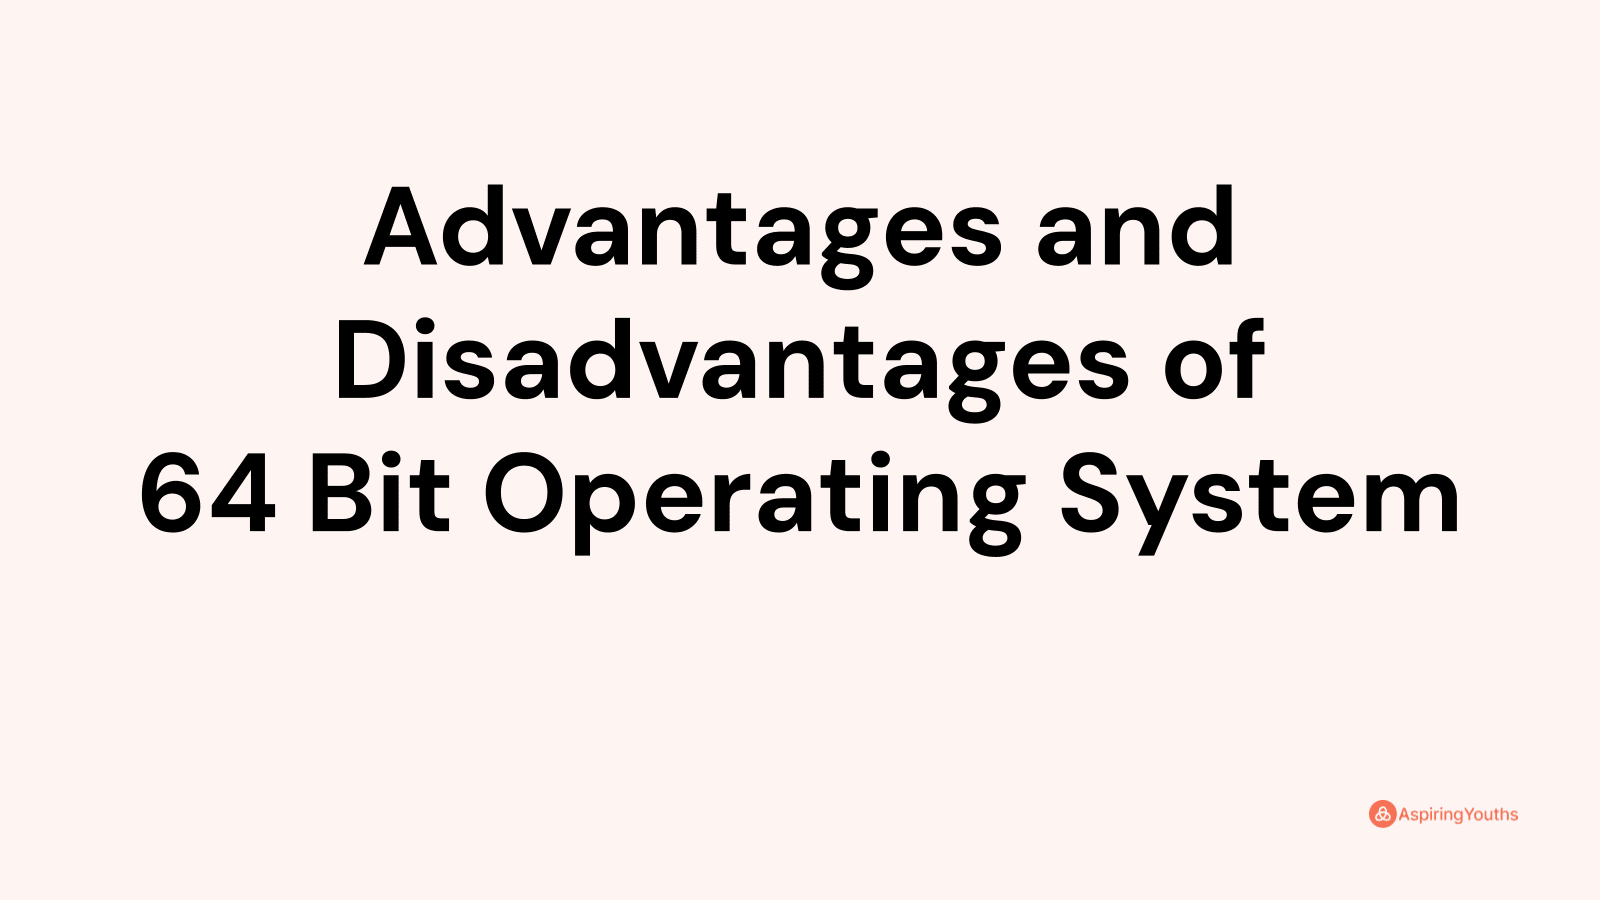 Advantages and disadvantages of 64 Bit Operating System